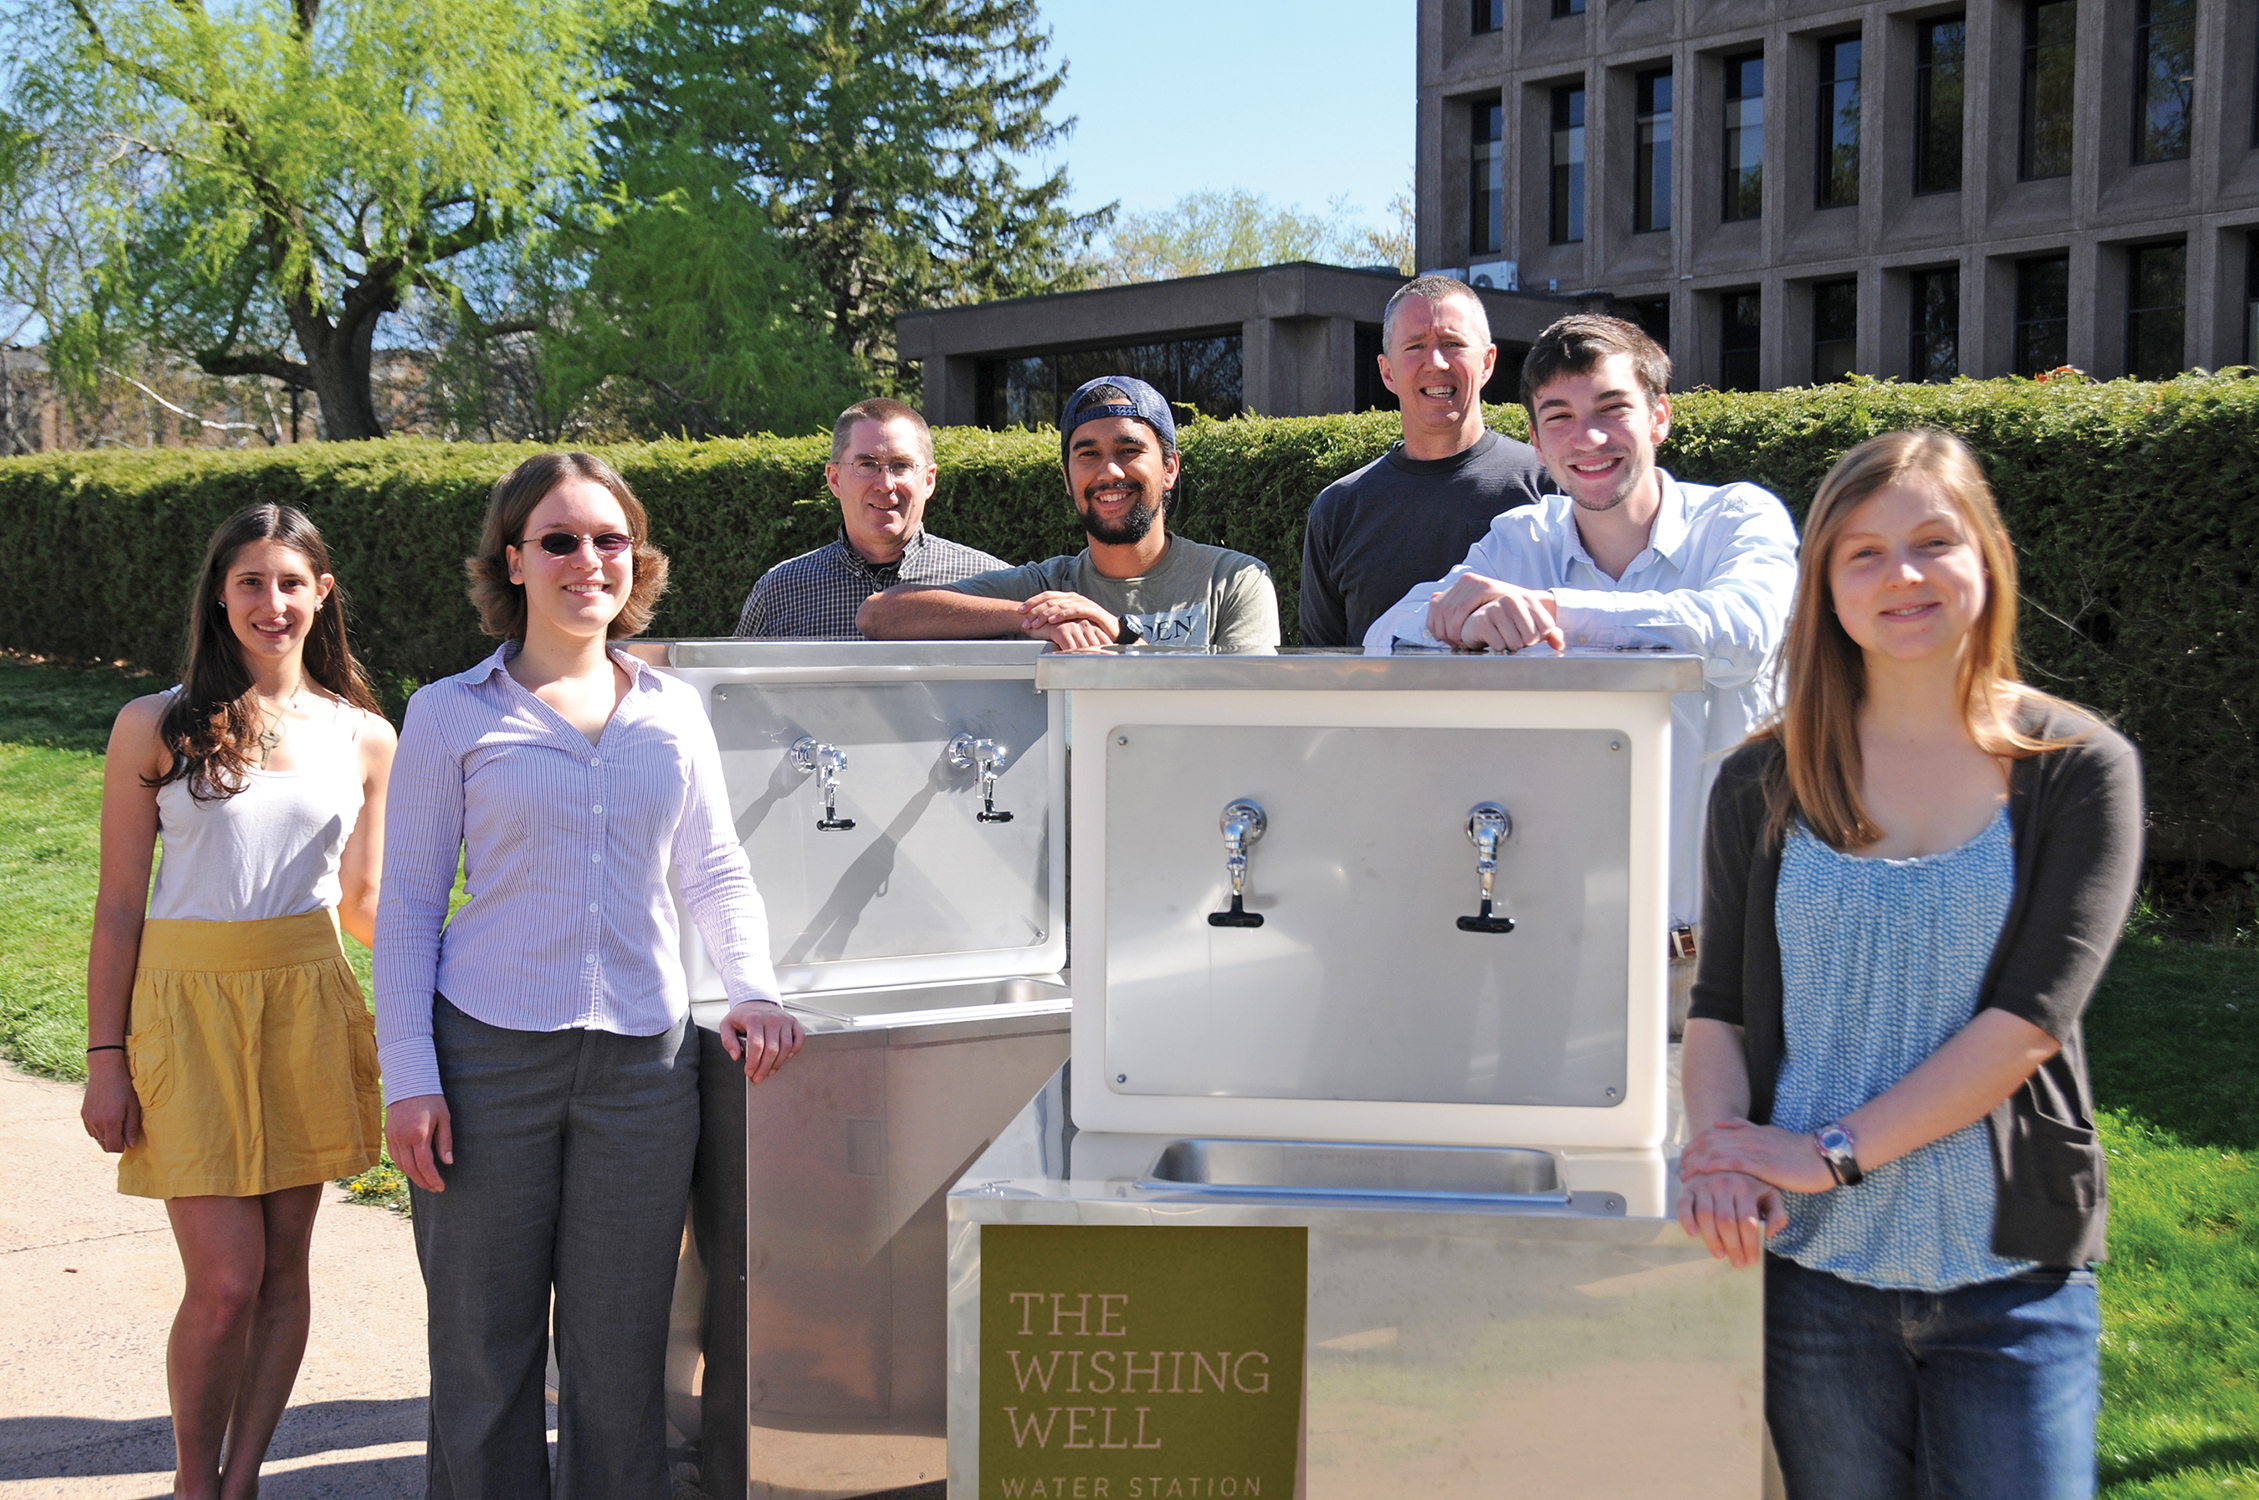 From left, Nina Gerona ’15; Jen Kleindienst, sustainability coordinator; Bruce Strickland, instrument maker specialist; Tavo True-Alcalá ’15; Dave Strickland, instrument maker specialist; Brent Packer ’15; and Madeleine O’Brien ’16 present the student-designed “Wishing Well.” Photo by Olivia Drake MALS ’08.